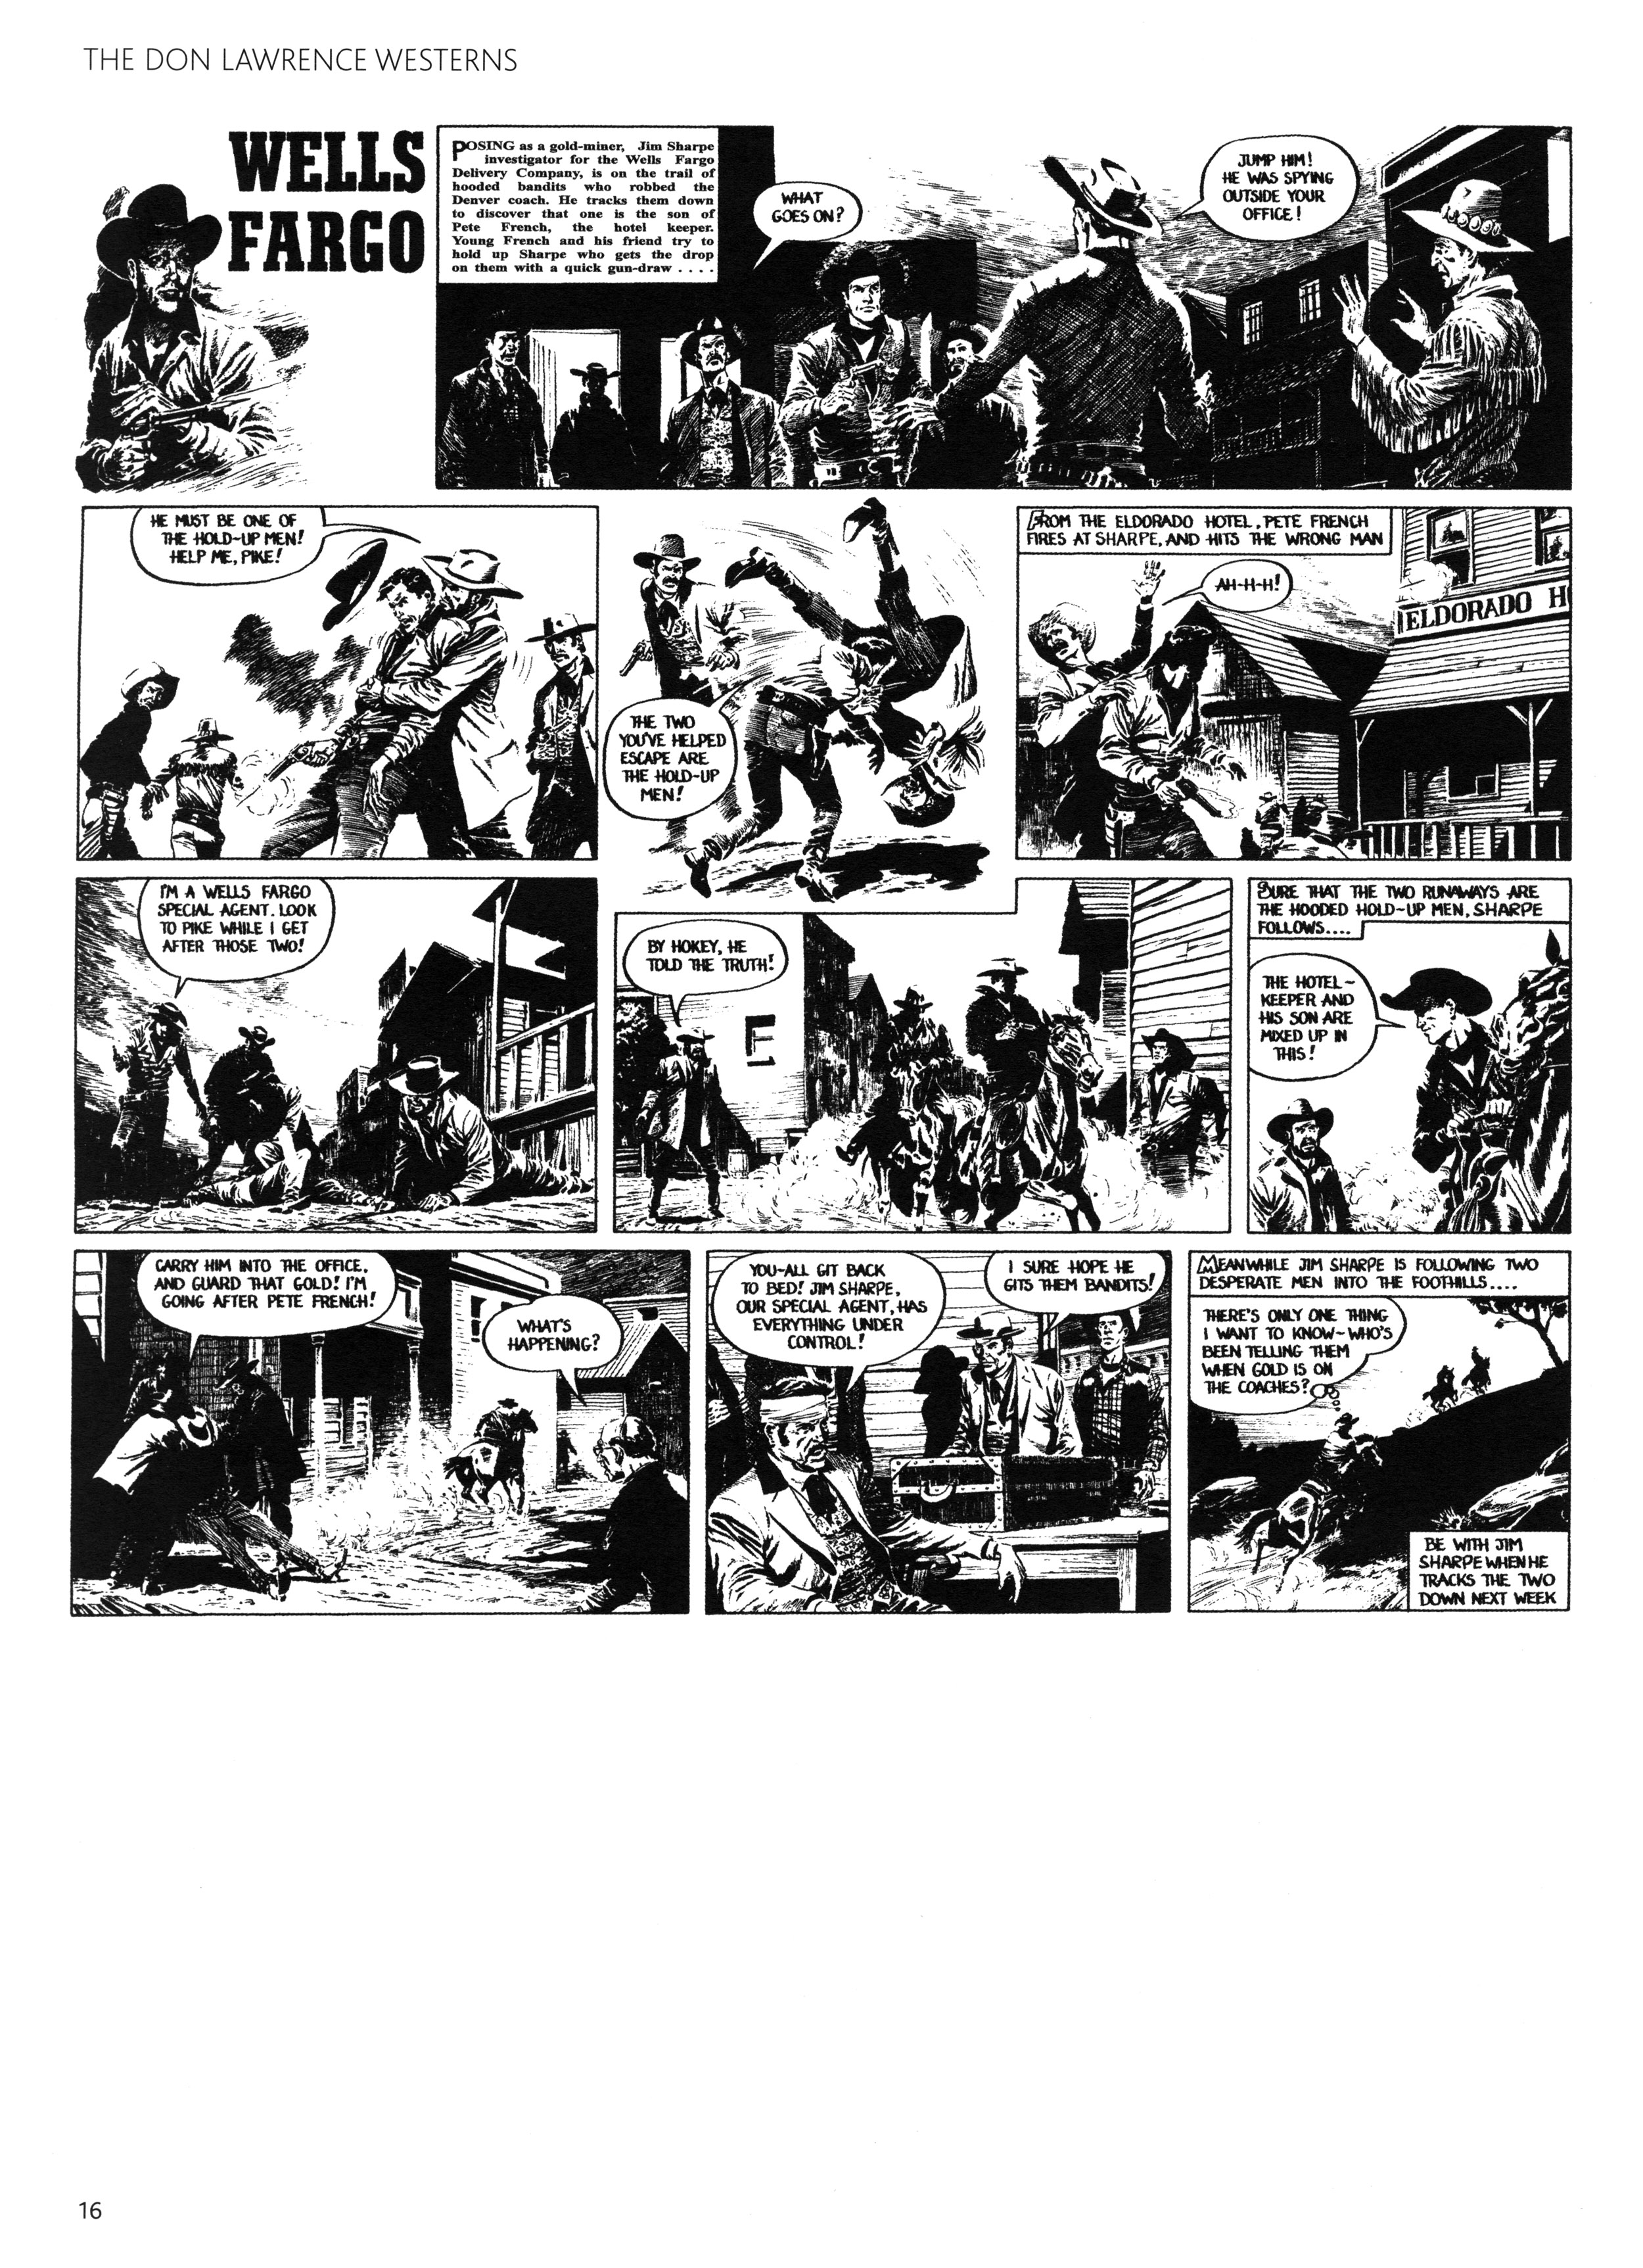 Read online Don Lawrence Westerns comic -  Issue # TPB (Part 1) - 20